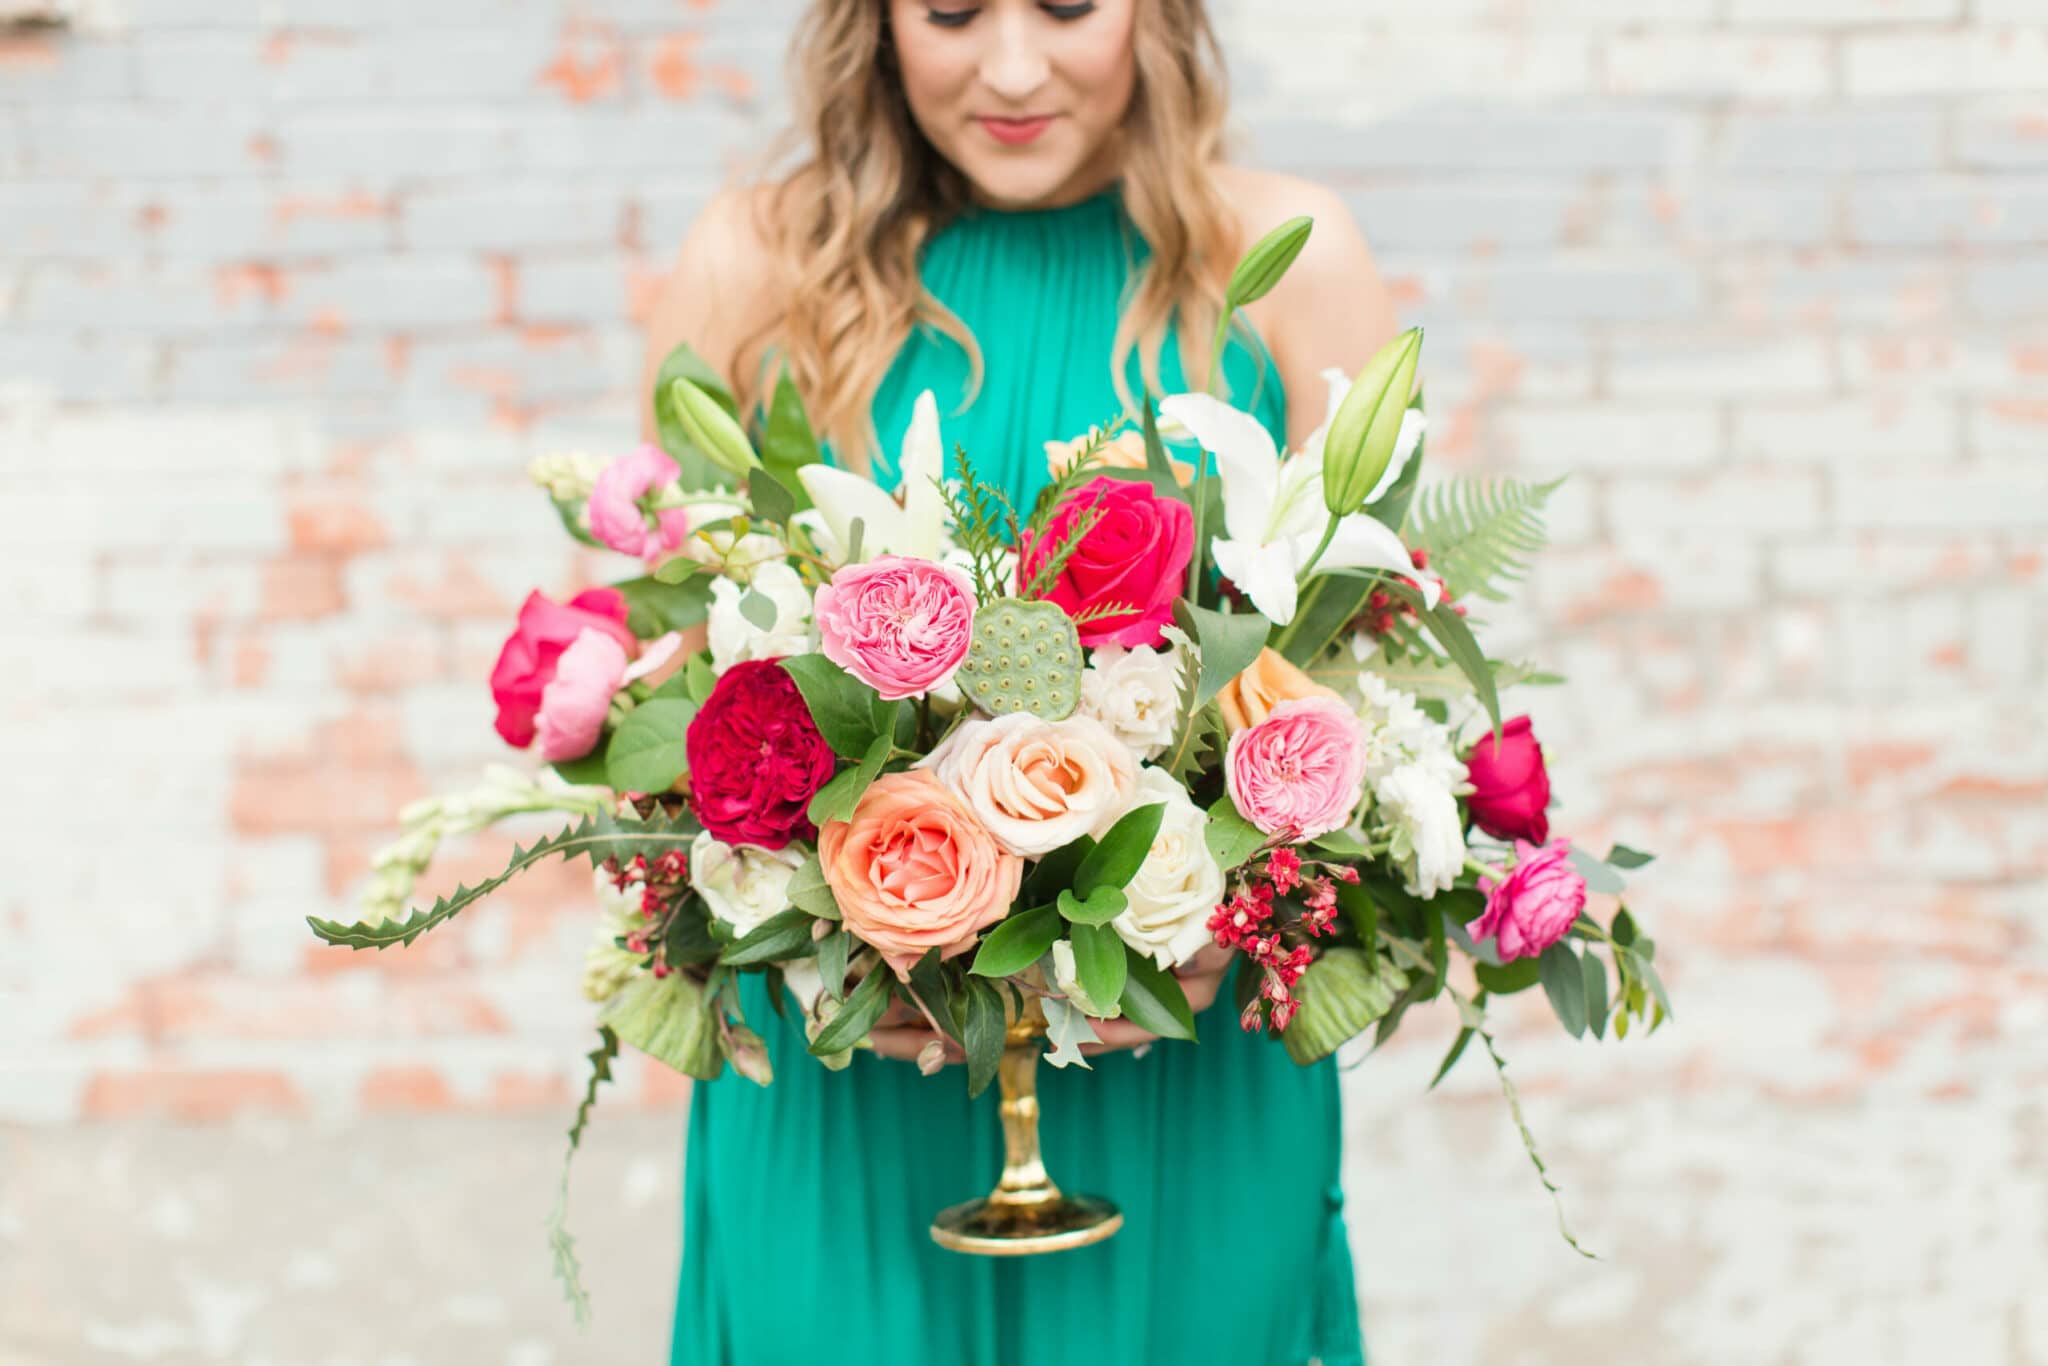 Girl in green dress holding brightly colored floral bouquet